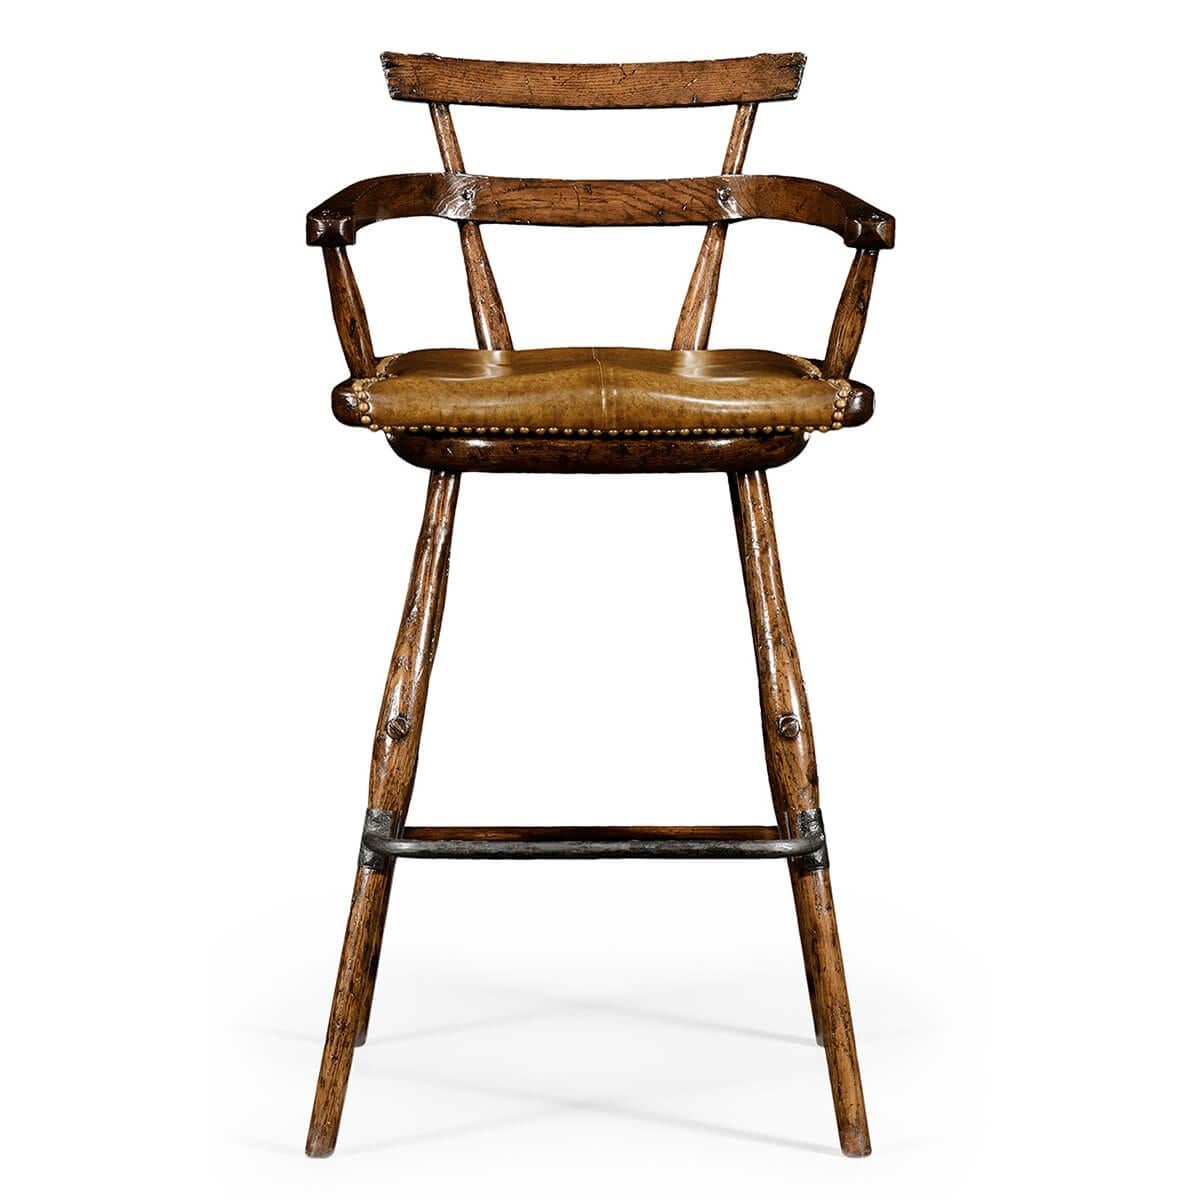 Unusually shaped and distressed oak country style barstool with a tapering back support above sweeping arms that extend from one of the slats. Studded brown leather seat above swollen legs and stretchers.

Dimensions: 22.75